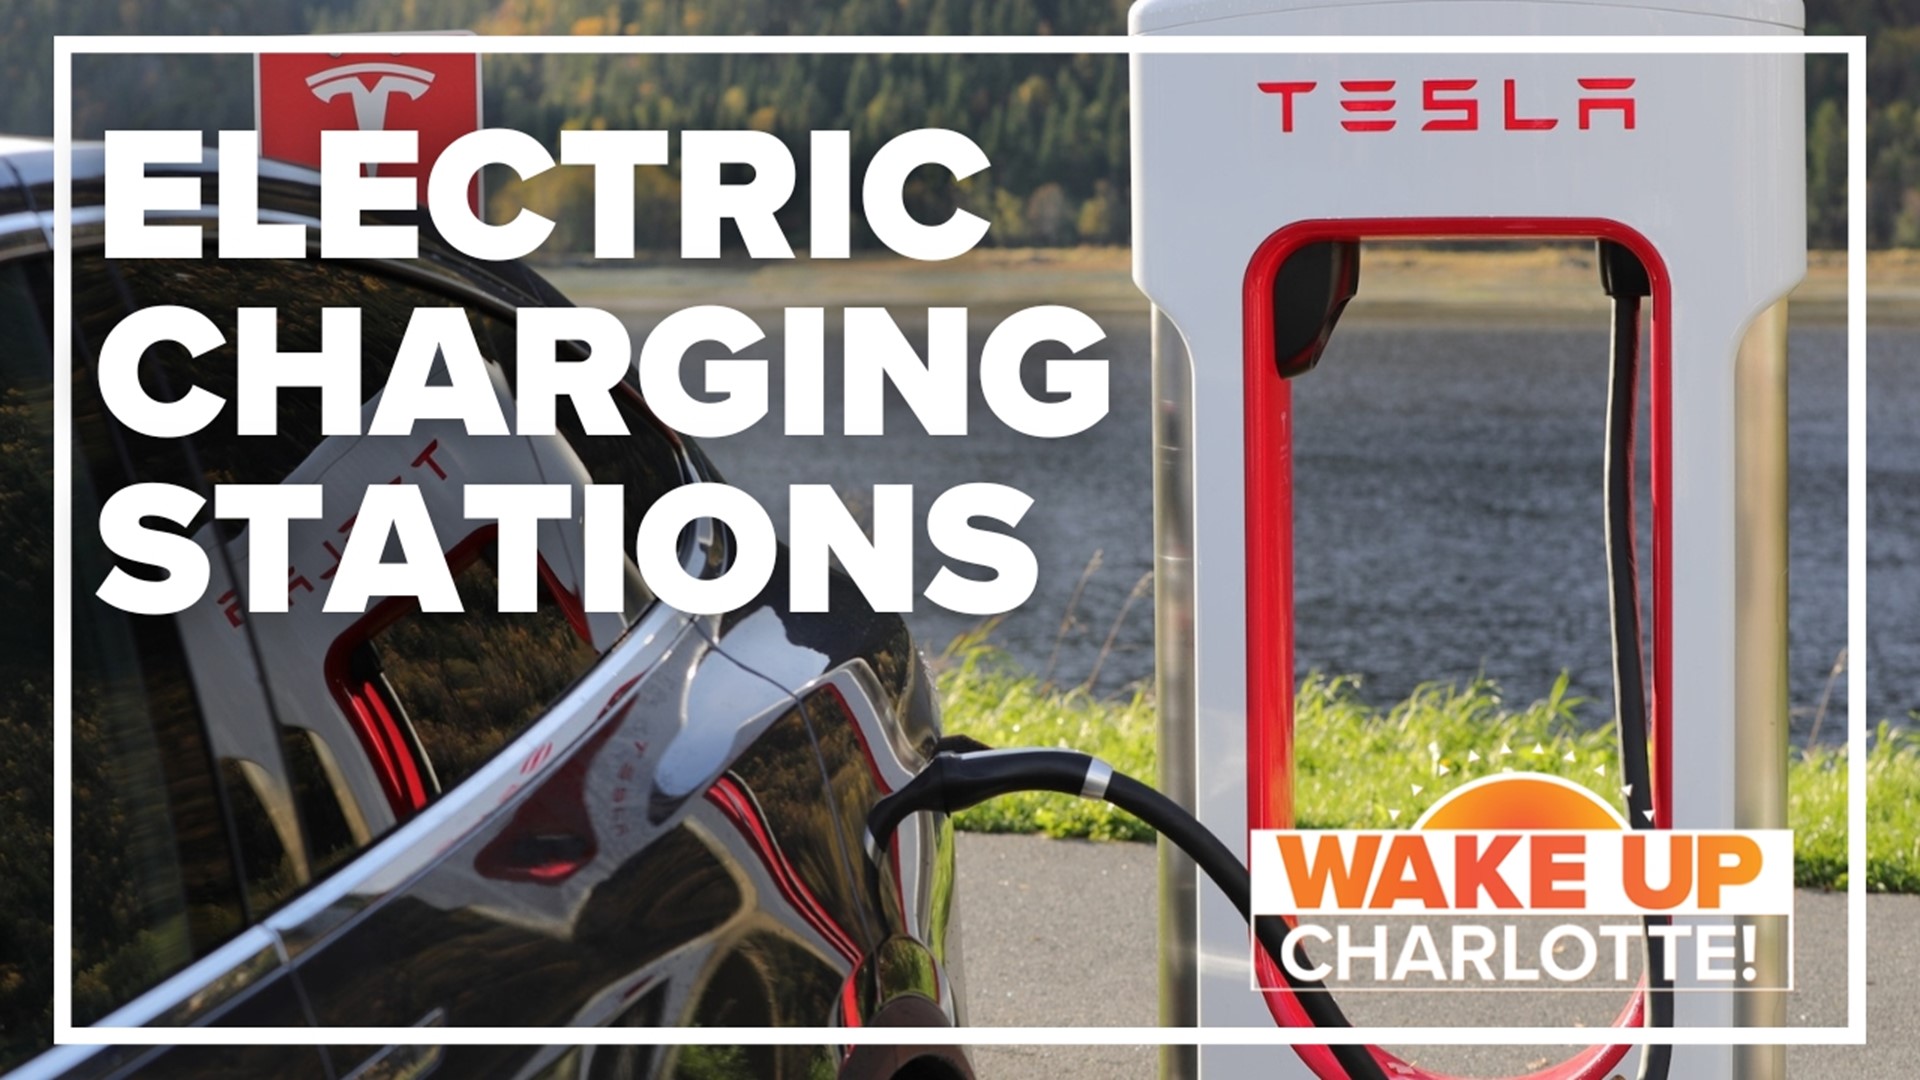 Connecting the dots on why electric car charging stations are too expensive and not profitable enough for gas station owners.